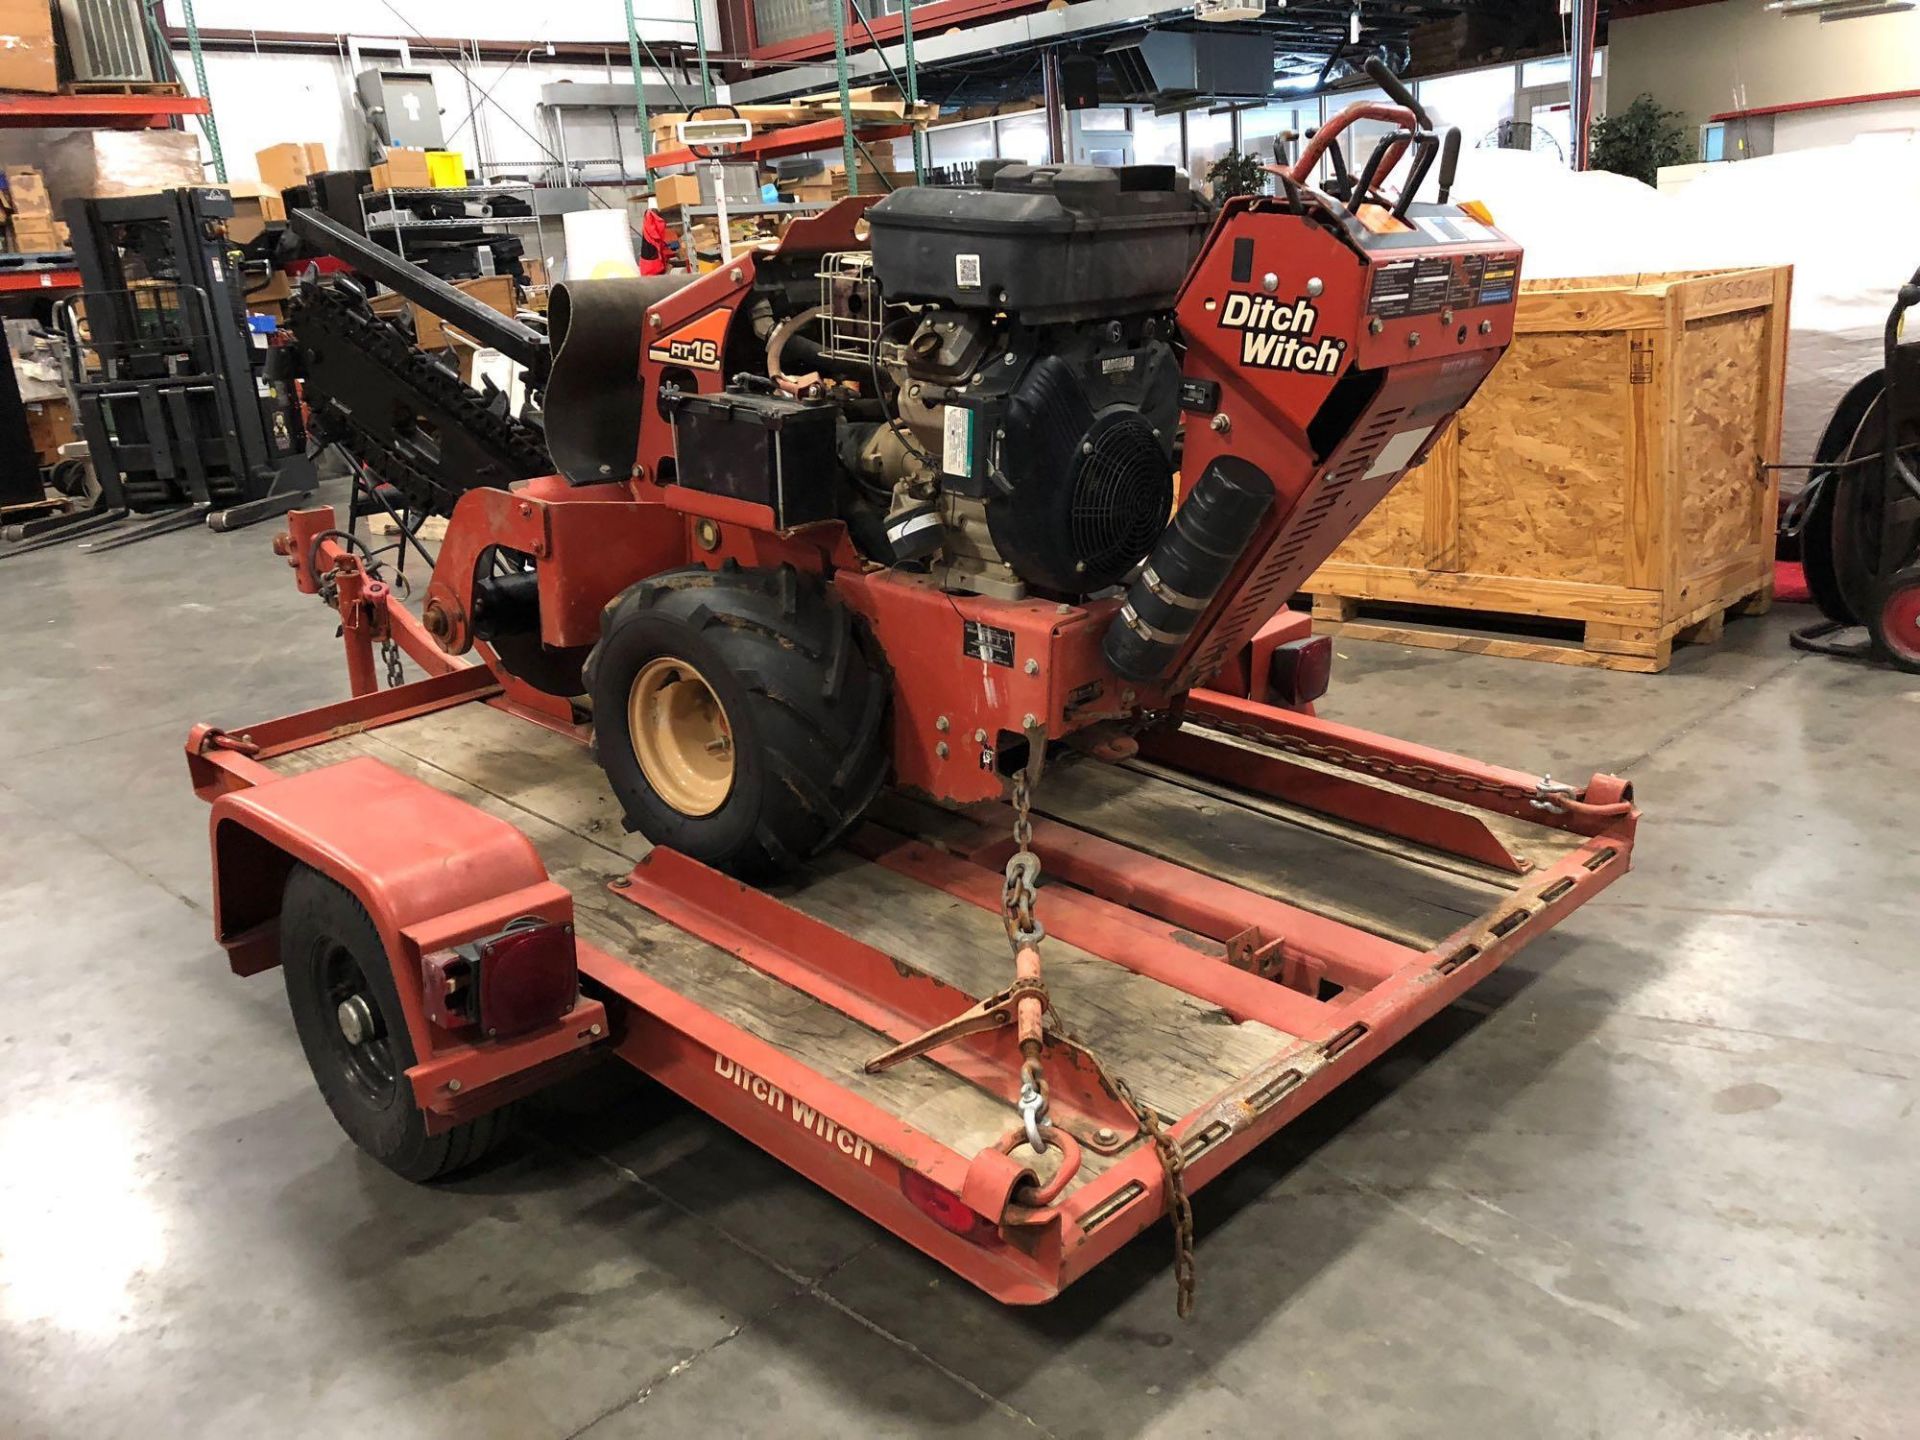 2012 DITCH WITCH RT16 WALK BEHIND TRENCHER W/ TRAILER, CARBIDE TEETH, 99.3 HOURS SHOWING - Image 4 of 10